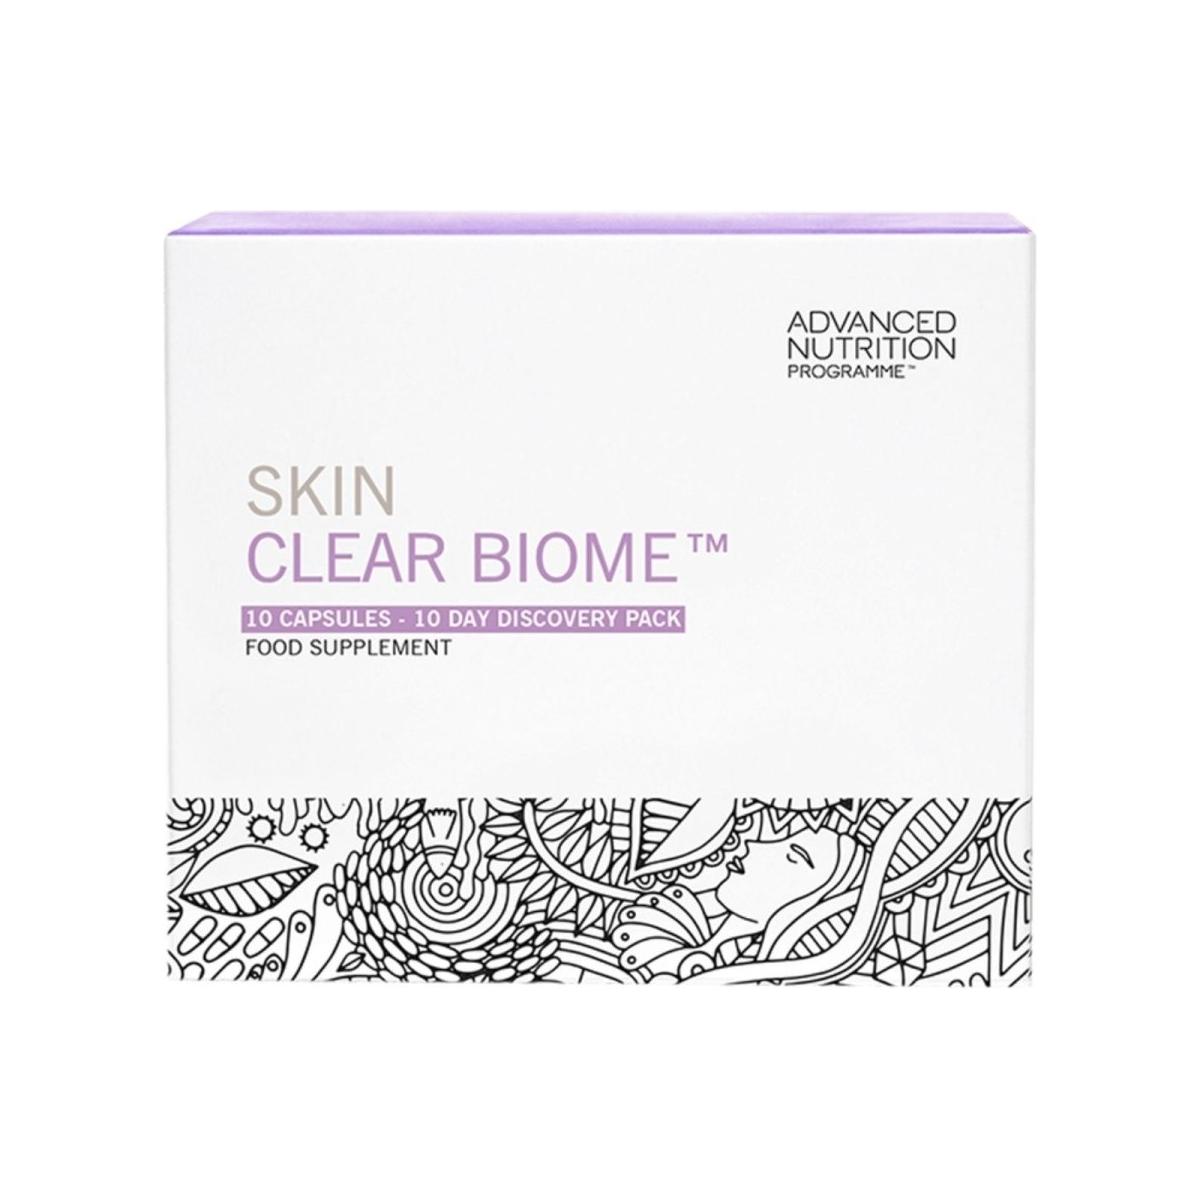 Advanced Nutrition Programme | Skin Clear Biome | 10 Day Discovery Pack - DG International Ventures Limited